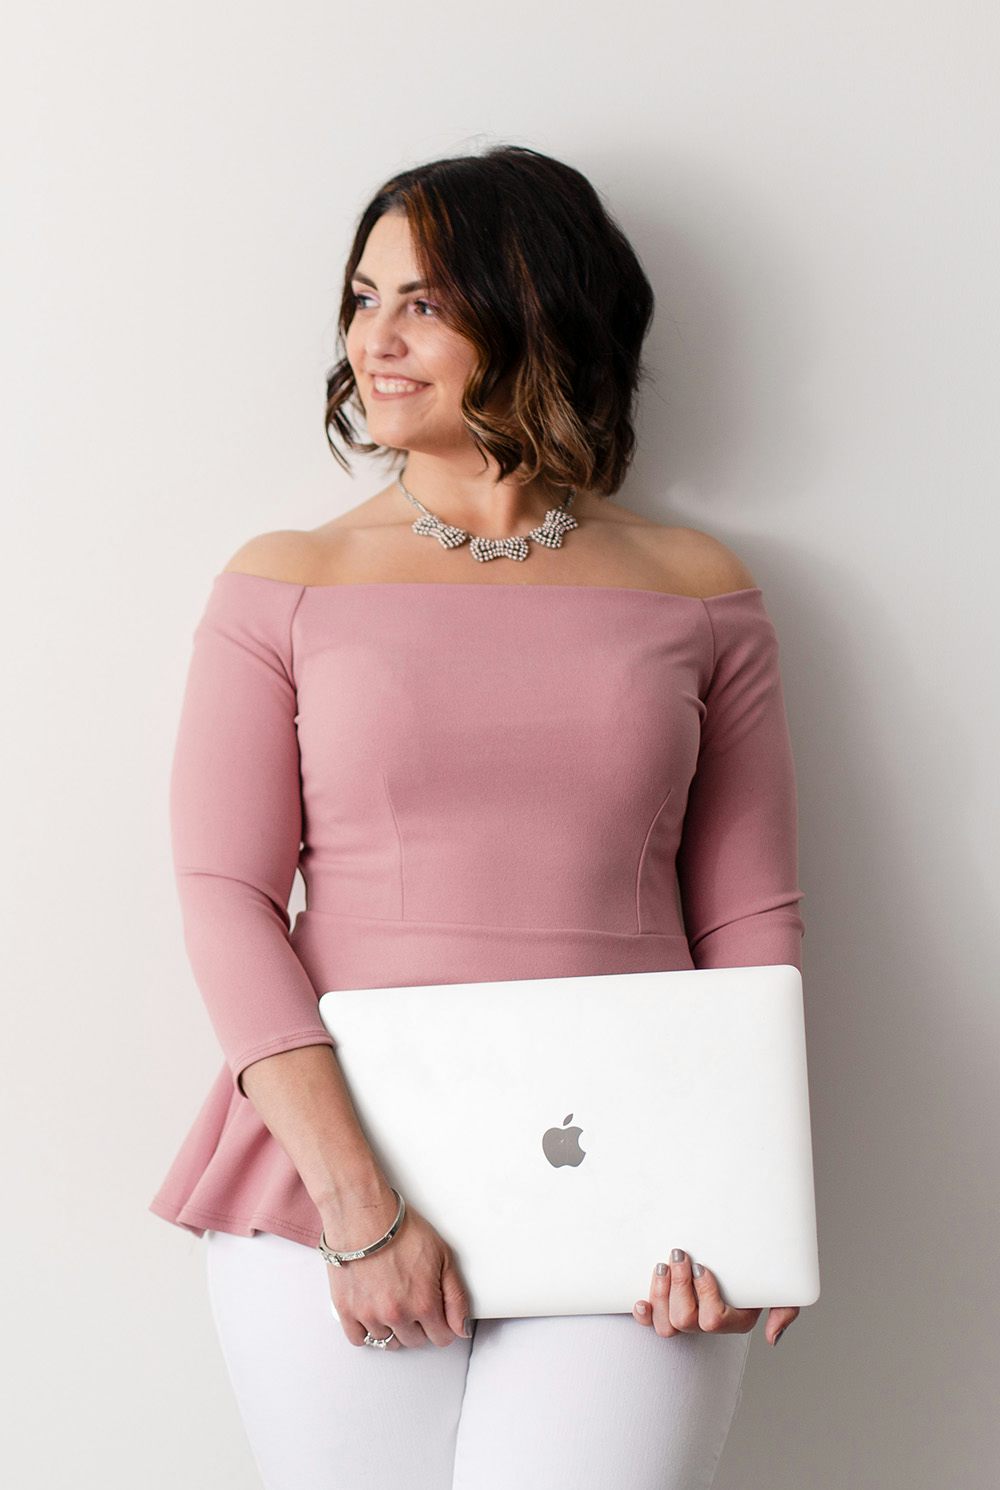 Smiling white woman with a curled brown bob looking off camera to the left, holding a Macbook Pro